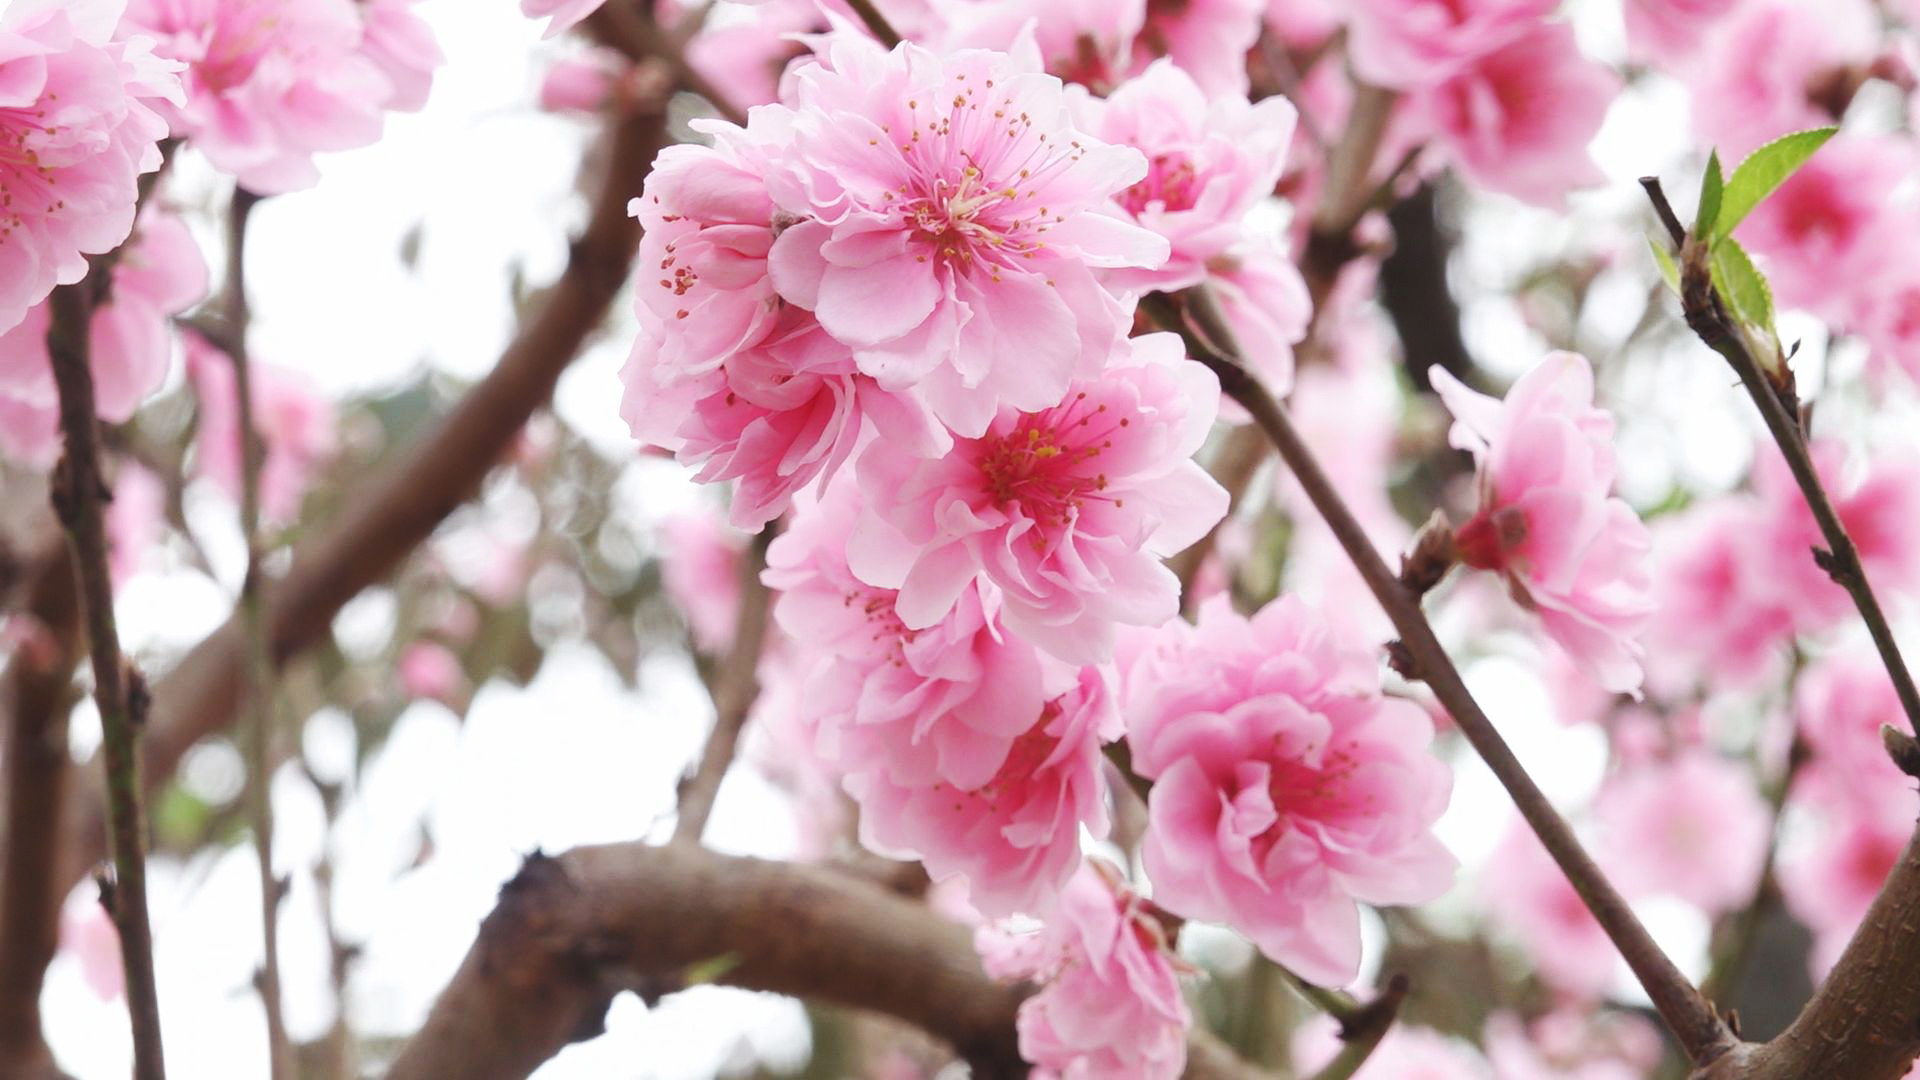 Peach Blossom Day, March 3 Holiday. Spring Blooms.